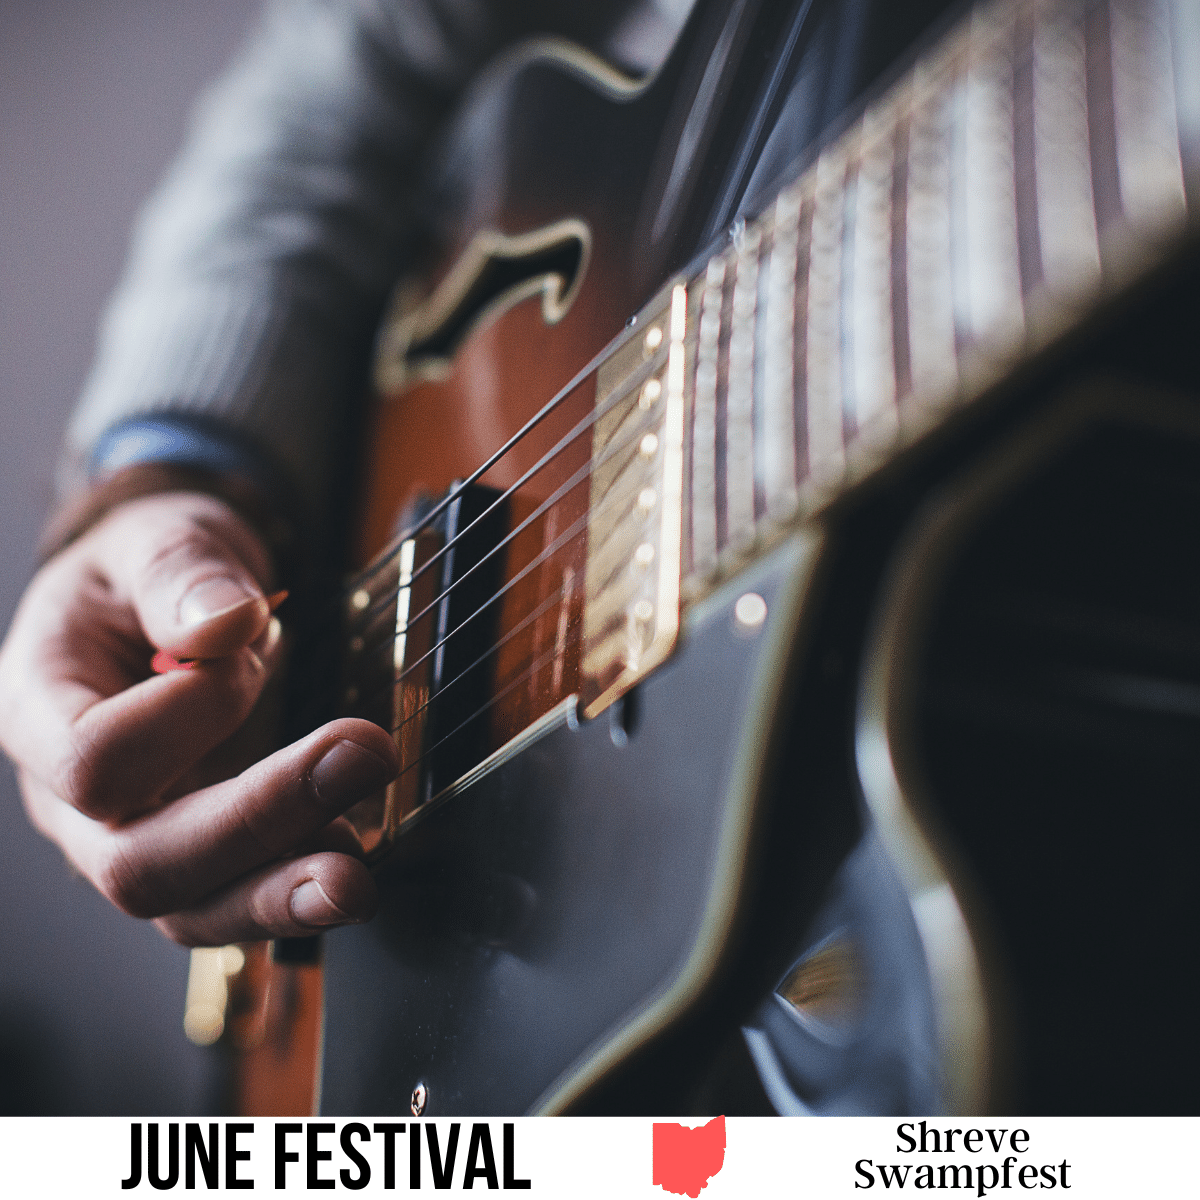 A square image of a close up photo of a person playing guitar. A white strip across the bottom has text June Festival Shreve Swampfest.